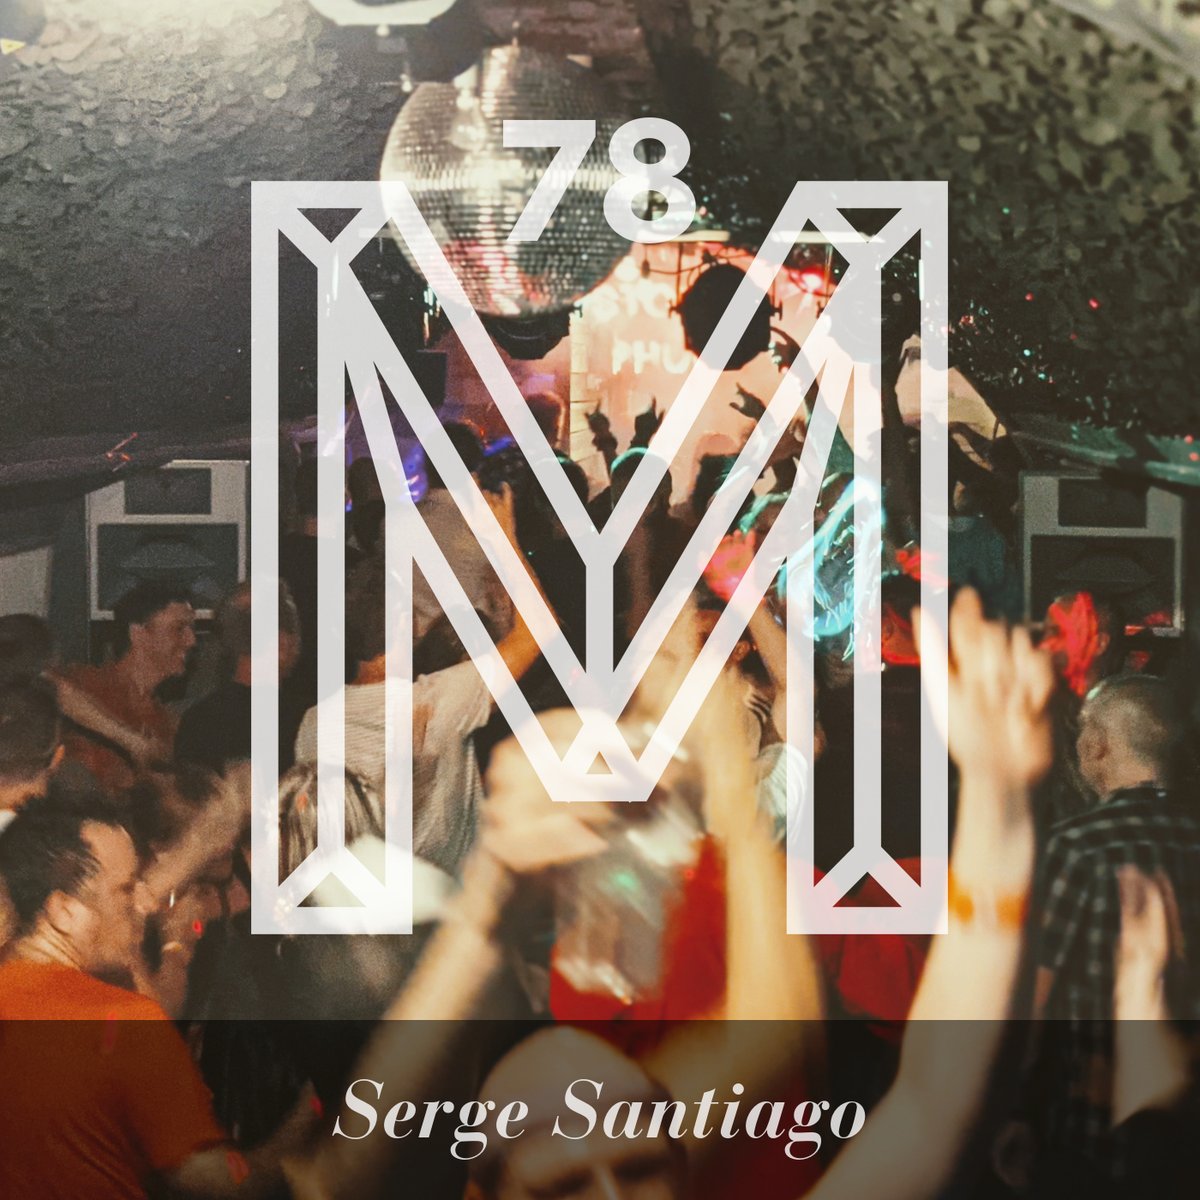 Our new podcast is live from Brighton genius @SergeSantiago - 1 hour of his own storming peak-time house productions soundcloud.com/monologues/m78…